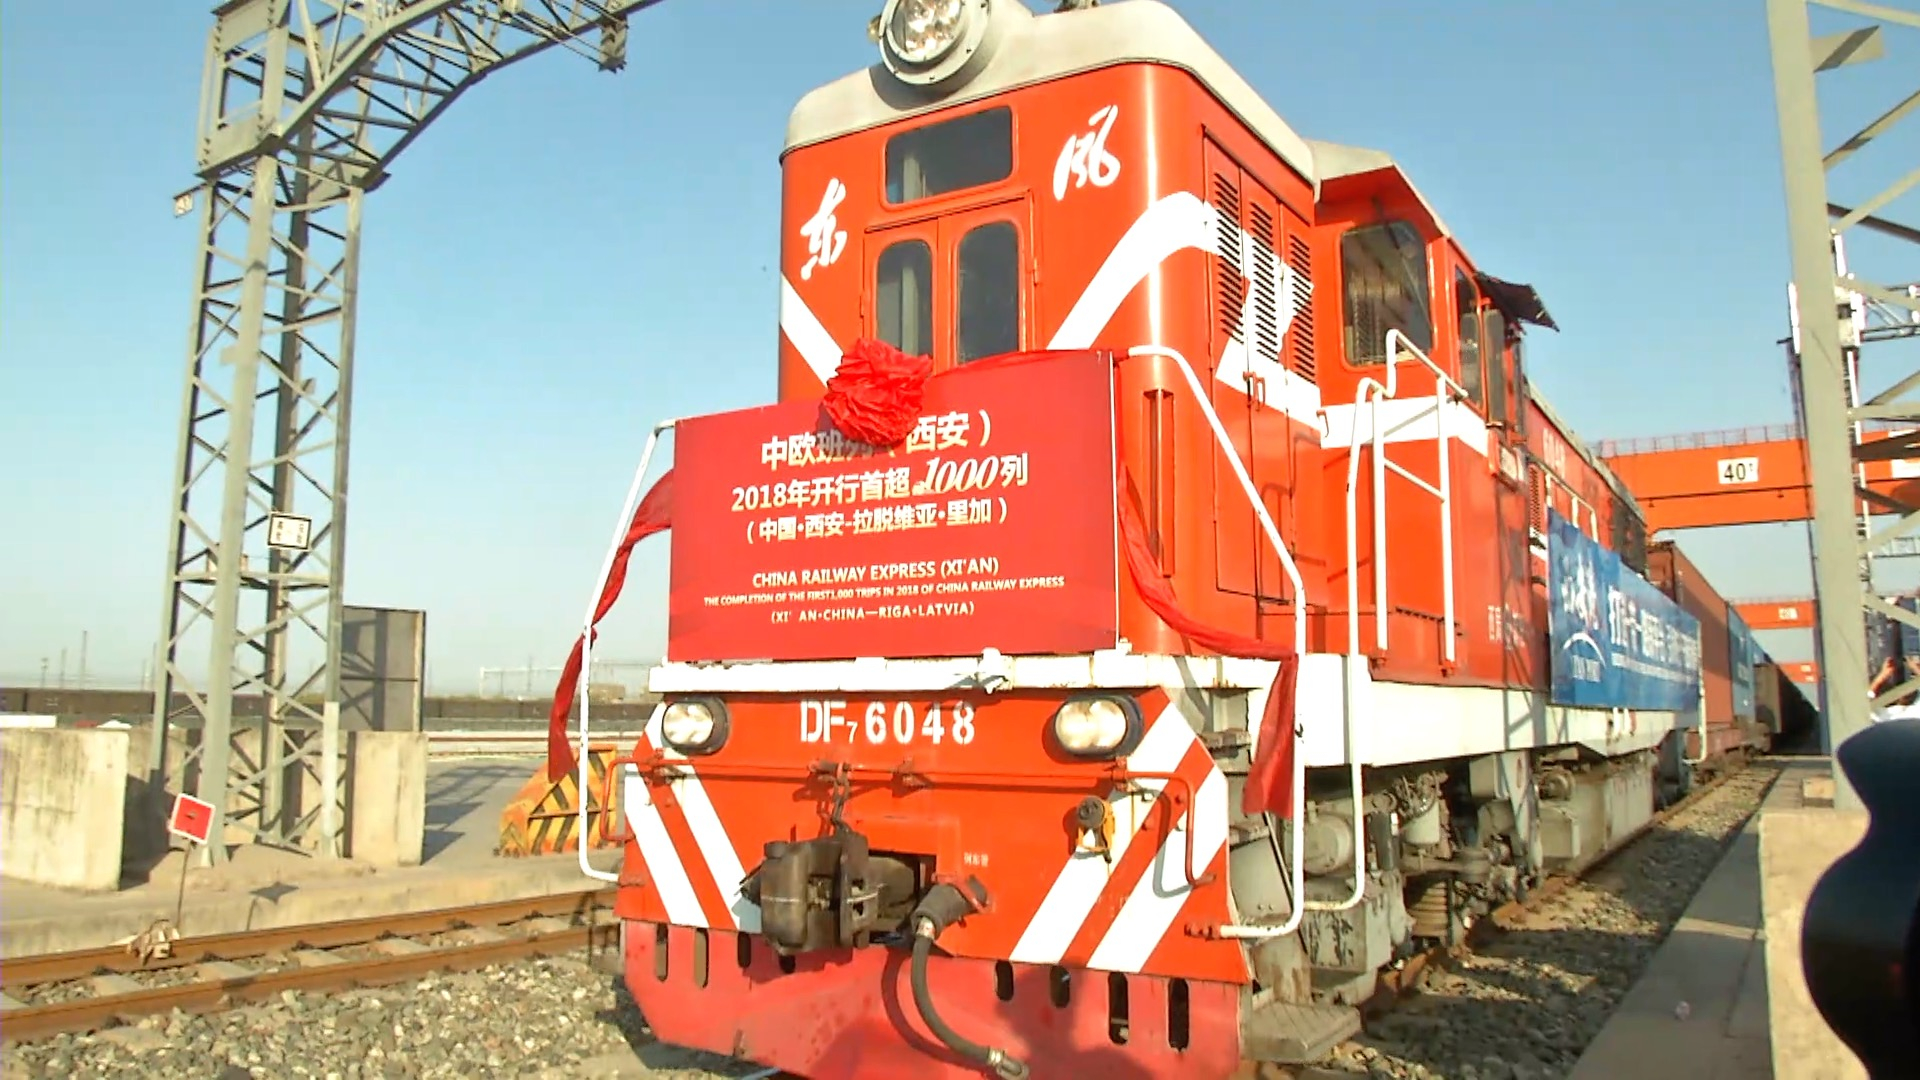 The 11th China Railway Express Line Opened In Shaanxi Province On